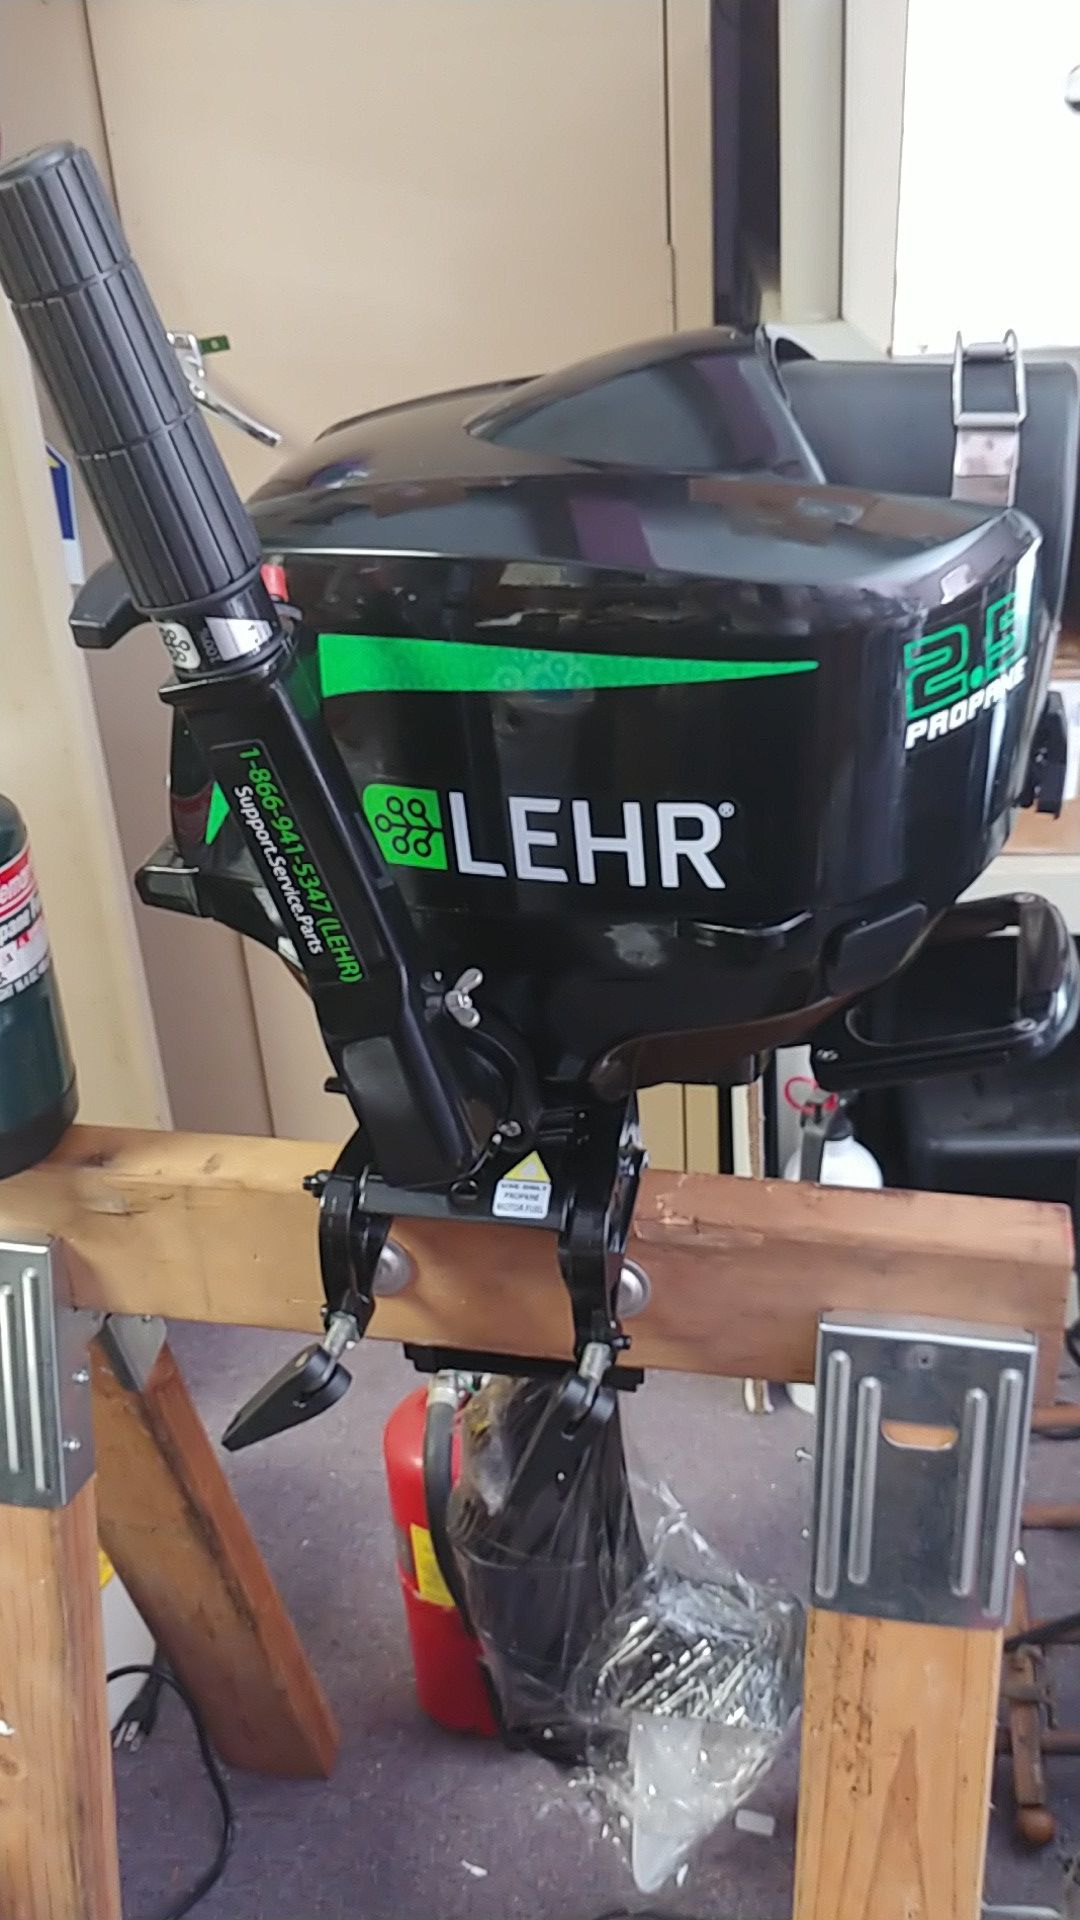 Lehr propane 2.5 up outboard motor